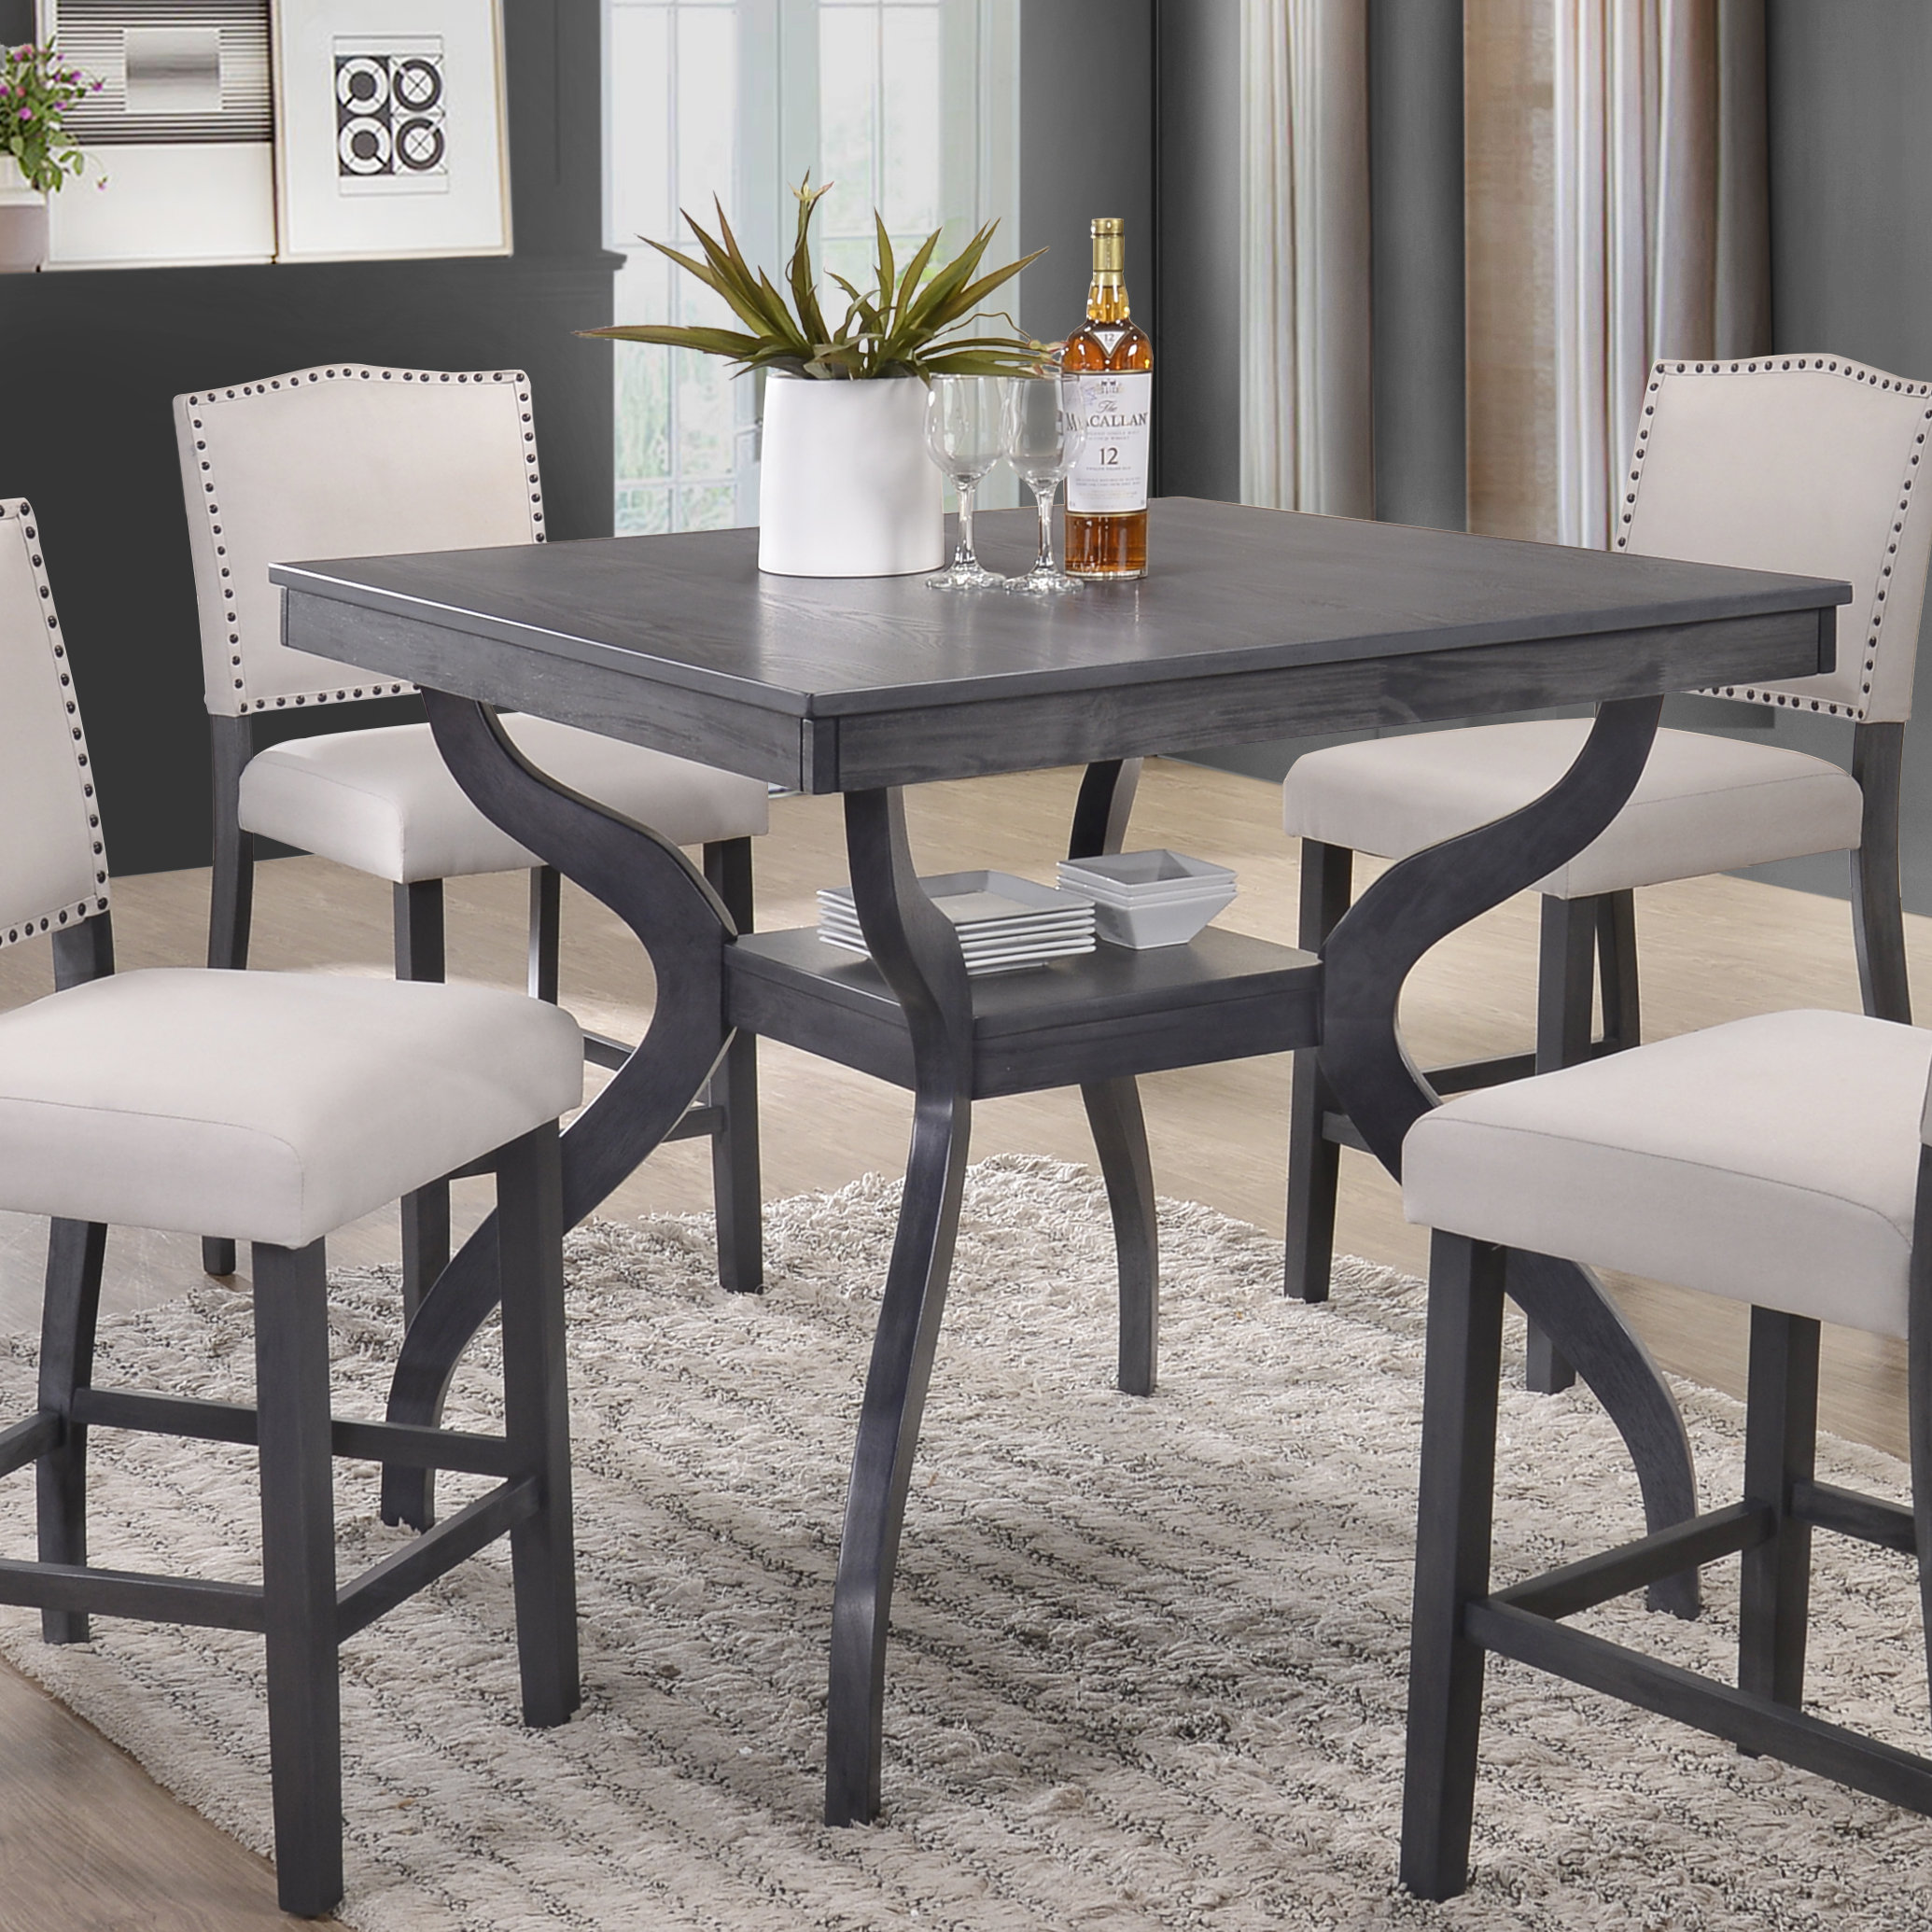 Darby Home Co Newton Counter Height Dining Table Reviews Wayfair